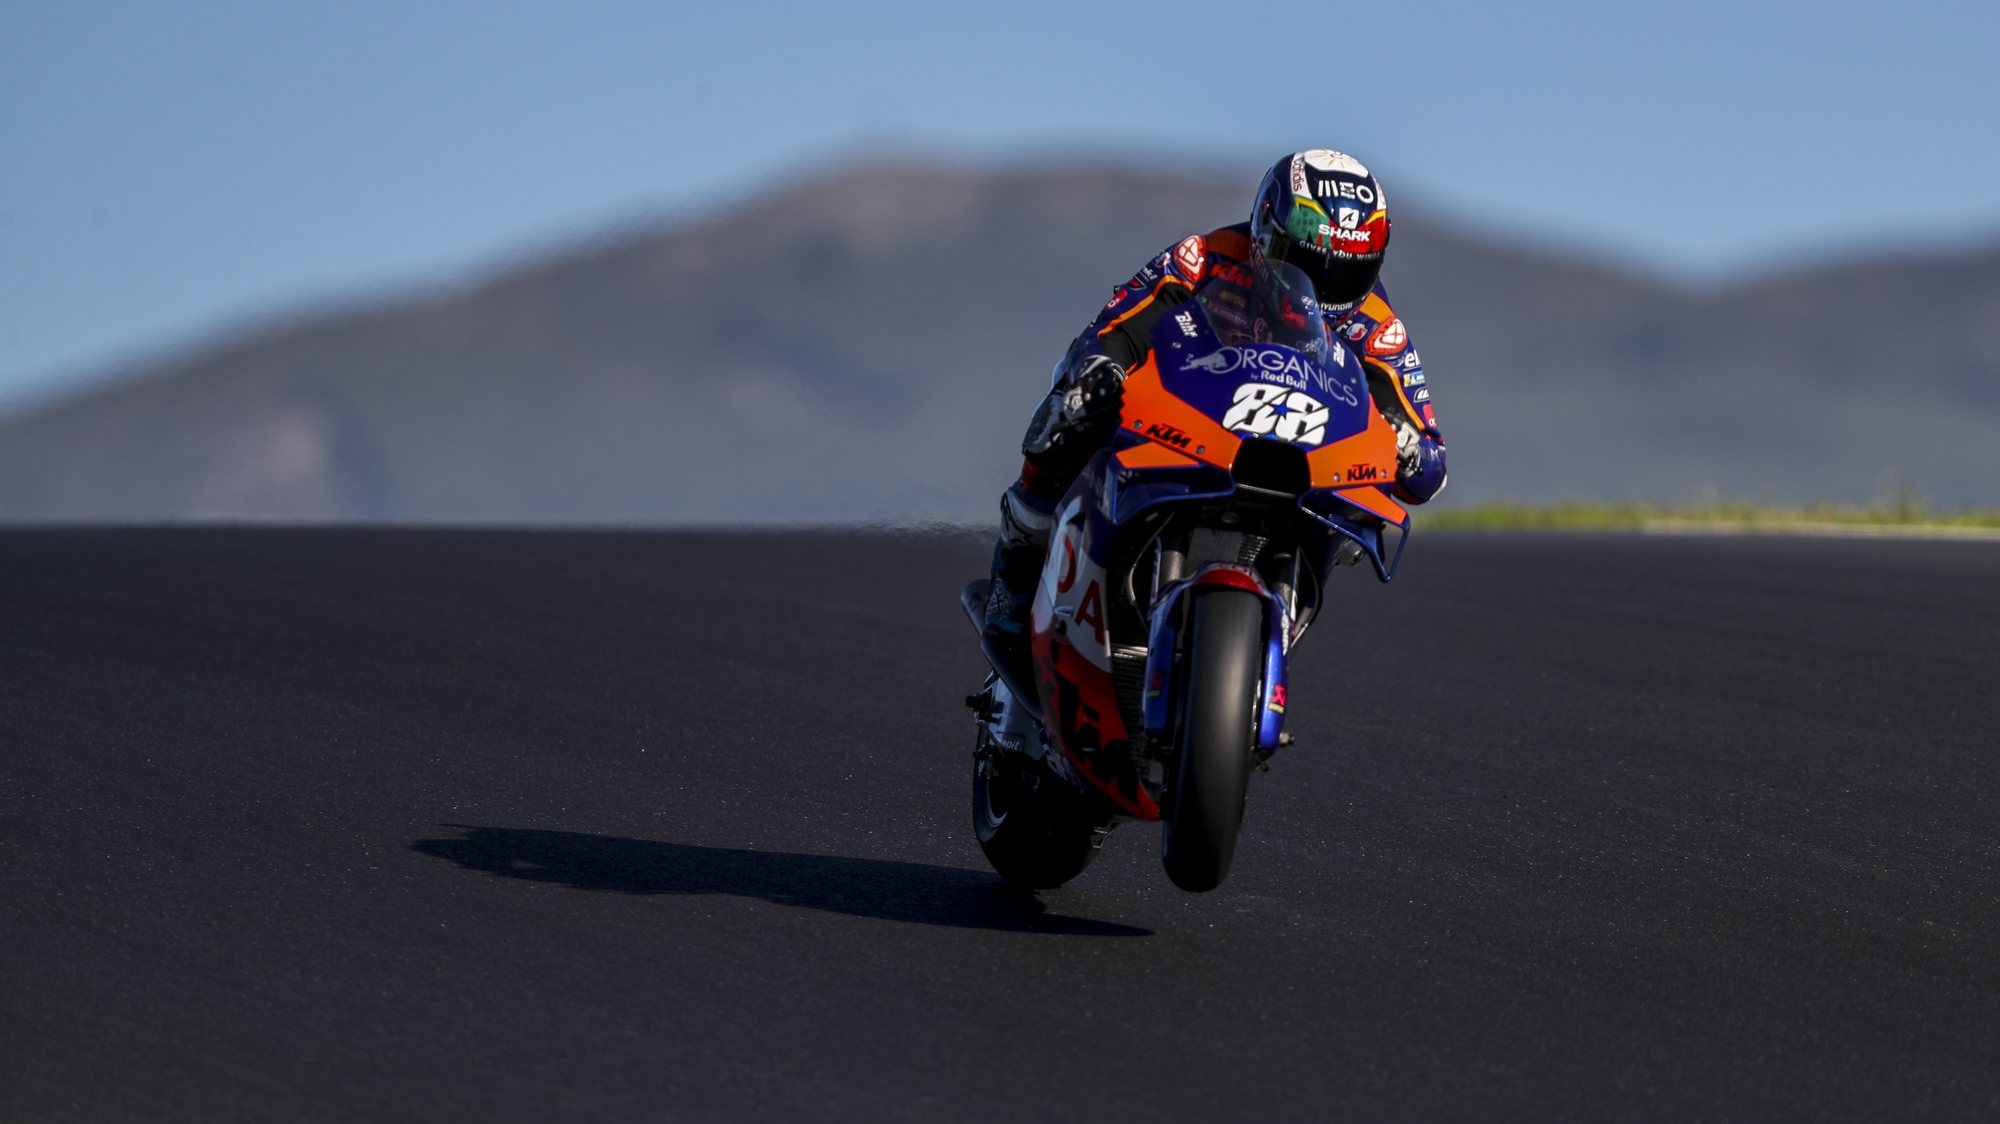 Portuguese rider Miguel Oliveira of KTM Tech 3 Team during the warm up session for the Motorcycling Grand Prix of Portugal at Algarve International race track, south of Portugal, 22 November 2020. The Motorcycling Grand Prix of Portugal will take place today. JOSE SENA GOULAO/LUSA